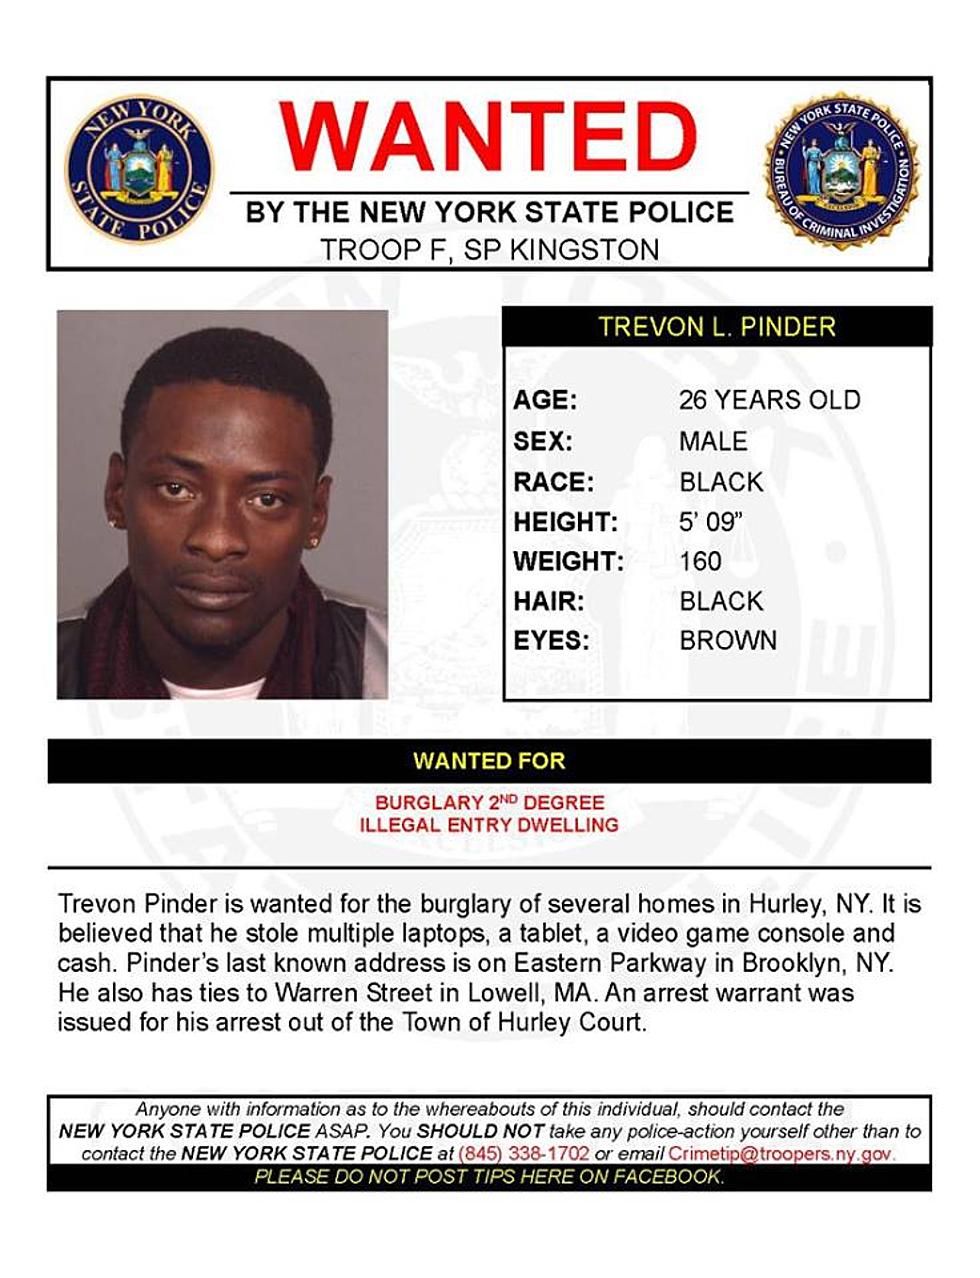 Warrant Wednesday: Brooklyn Man Wanted for Ulster County Burglaries